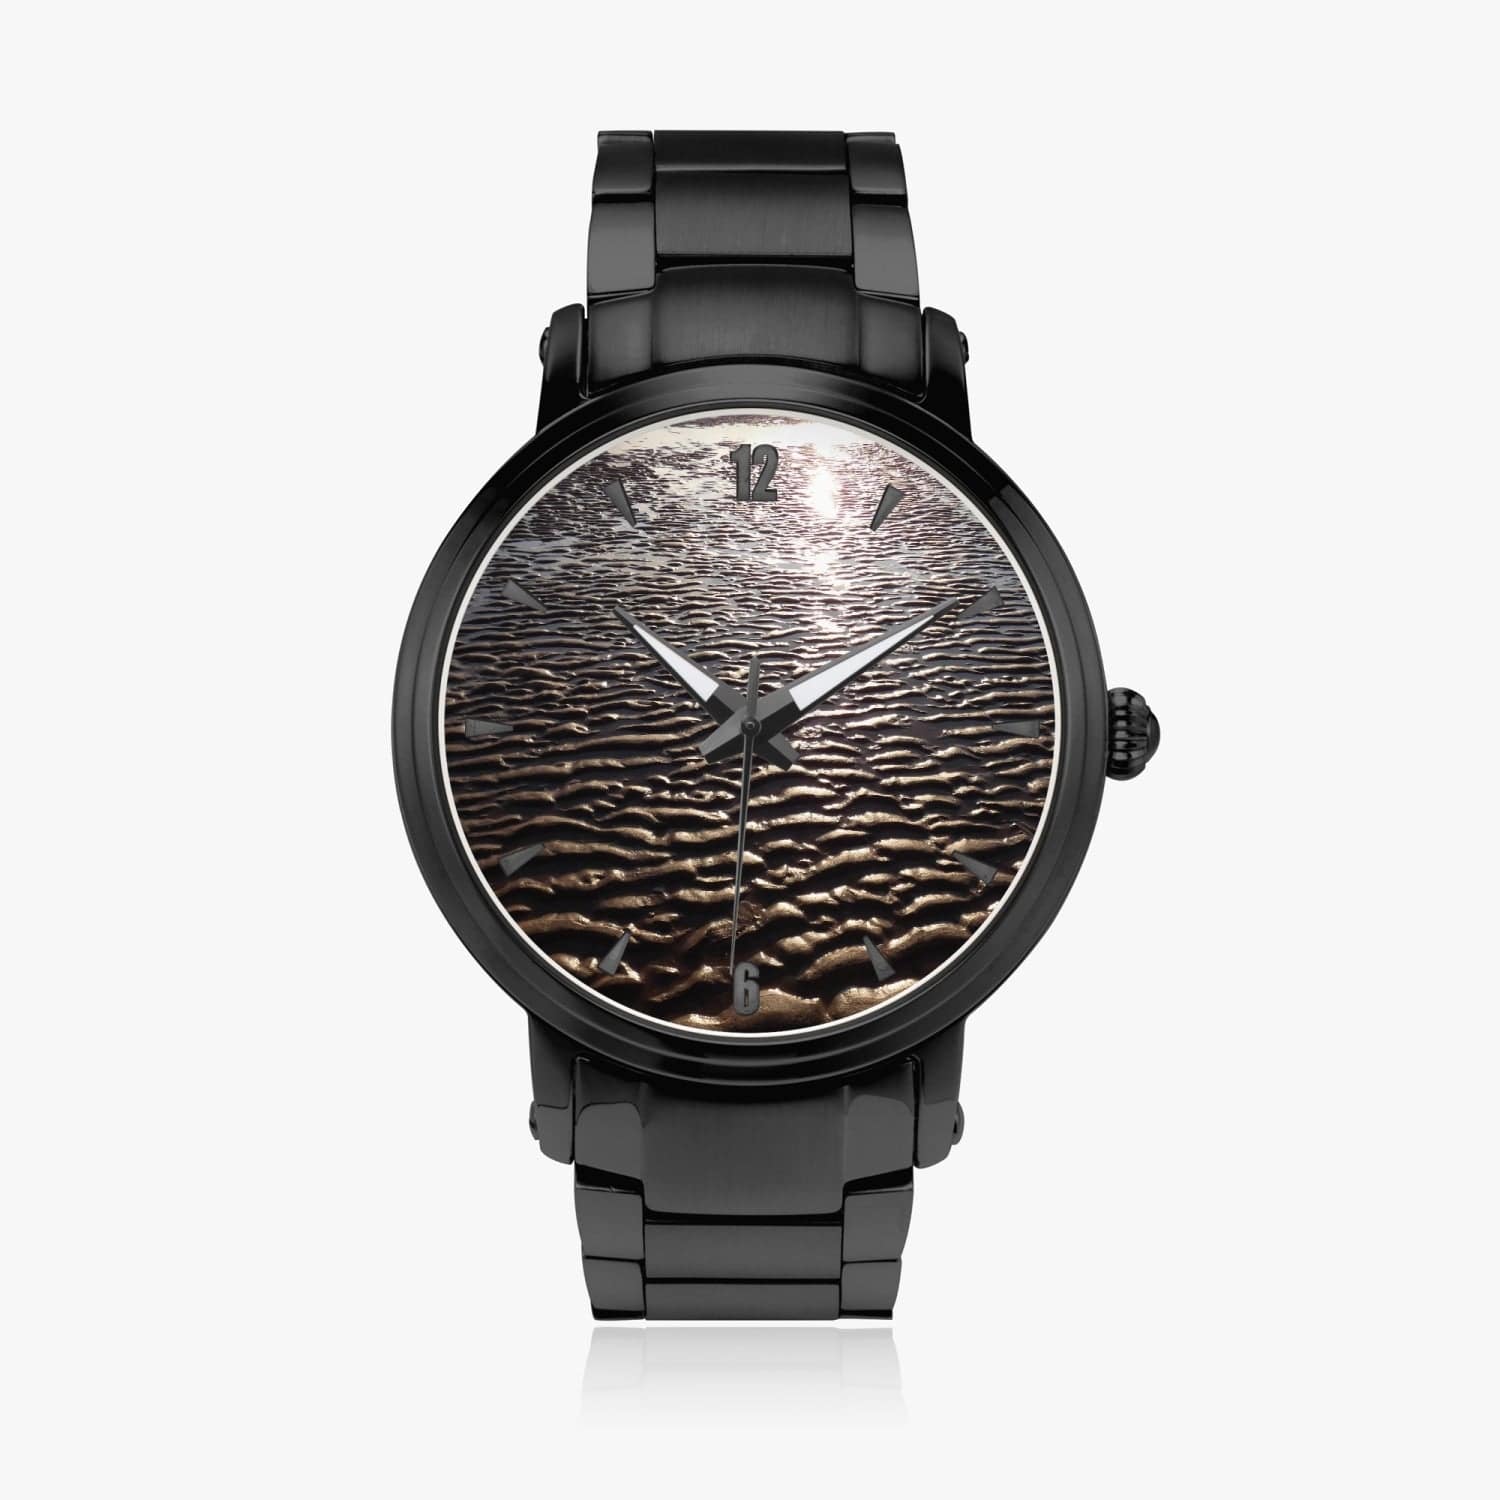 Sand relief. New Steel Strap Automatic Watch, by Sensus Studio Design